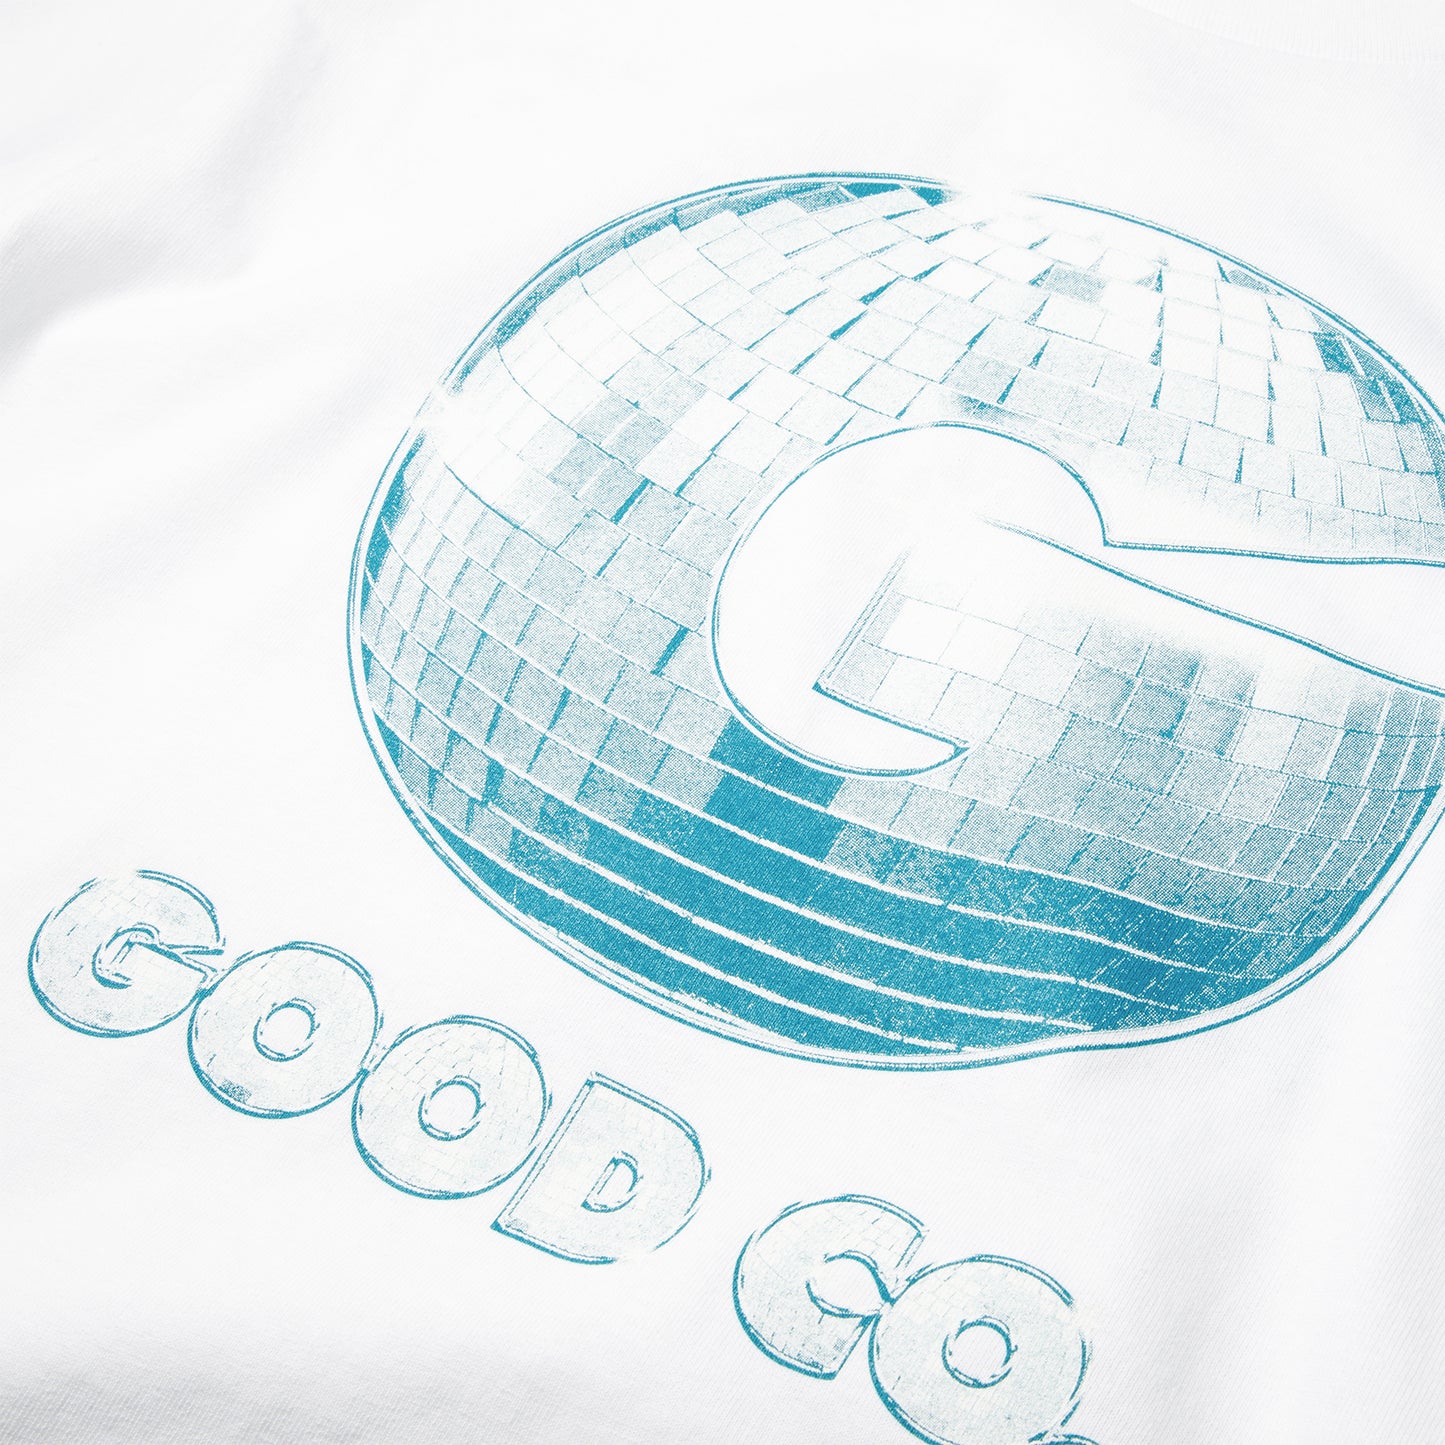 The Good Company World Party Tee (White)